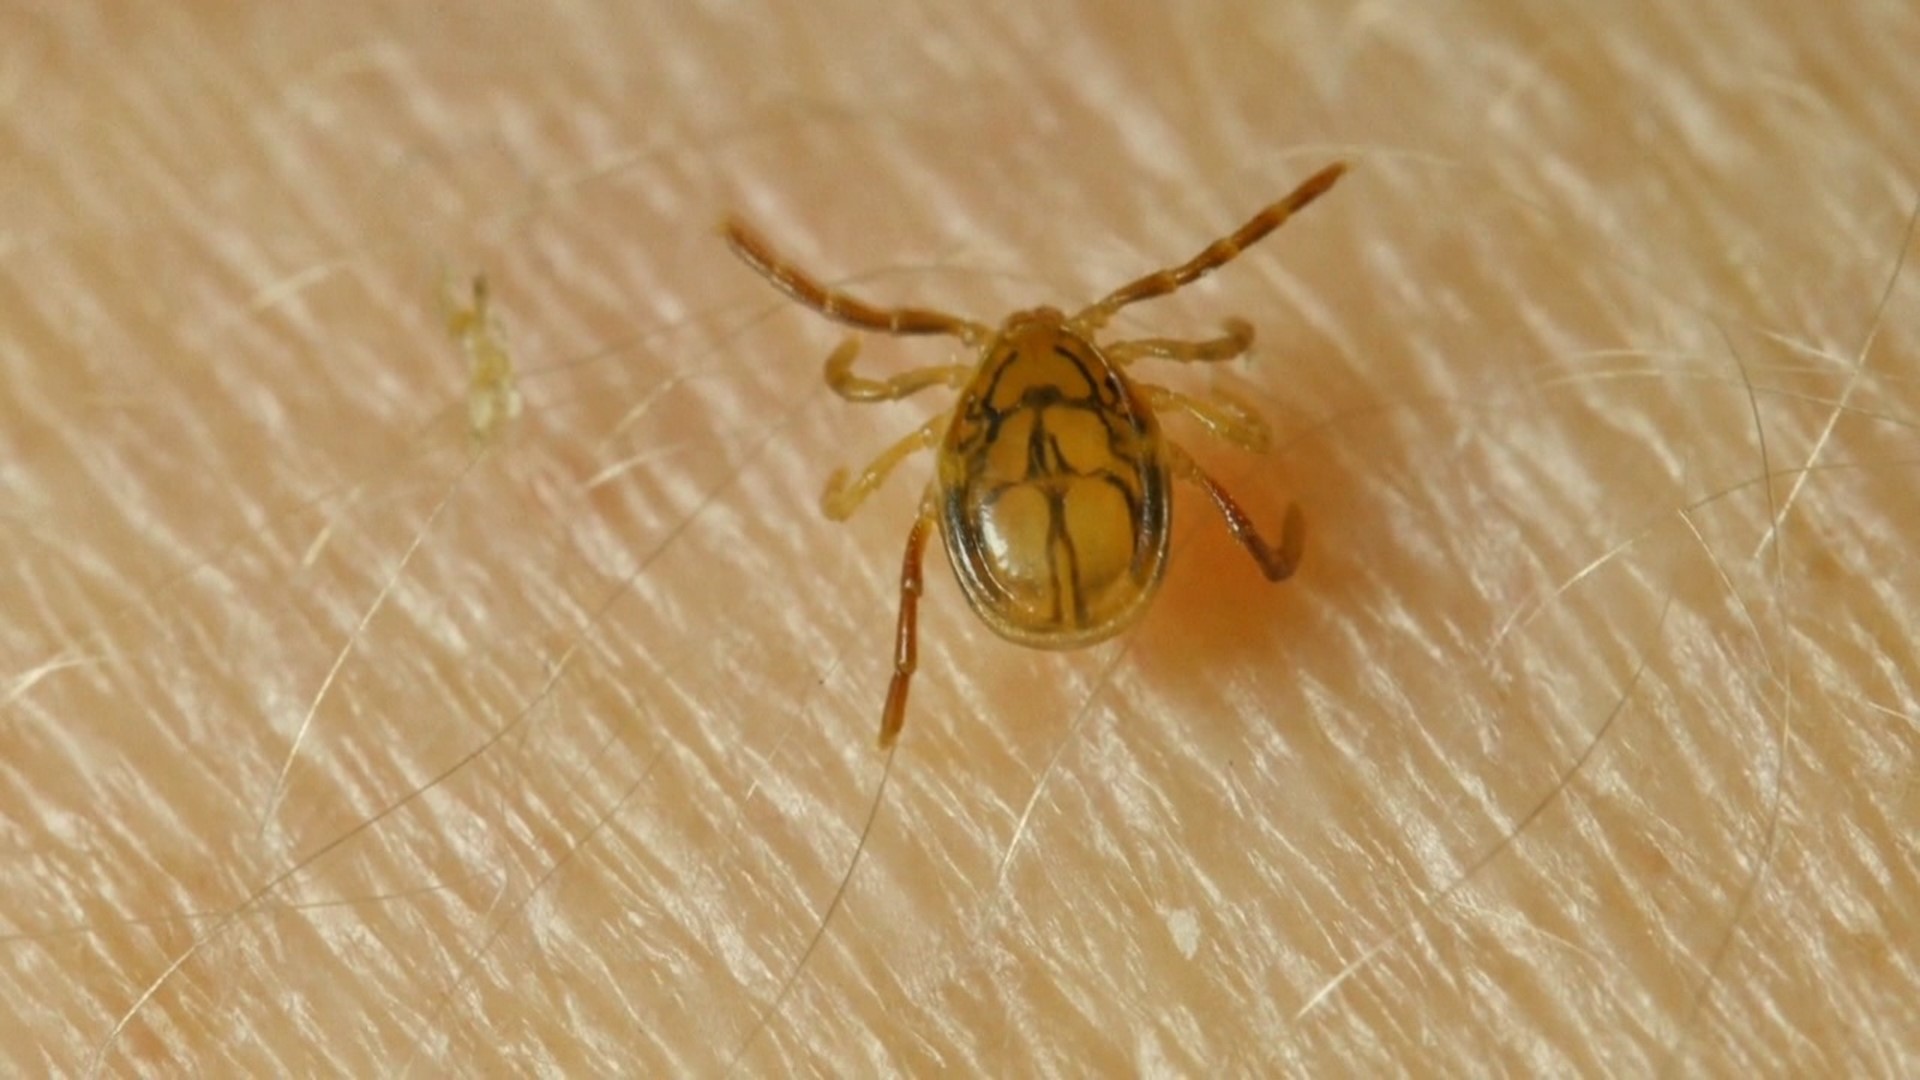 Newswatch 16's Courtney Harrison spoke with an expert about how a mild winter affects ticks and what to keep in mind when you're outside.